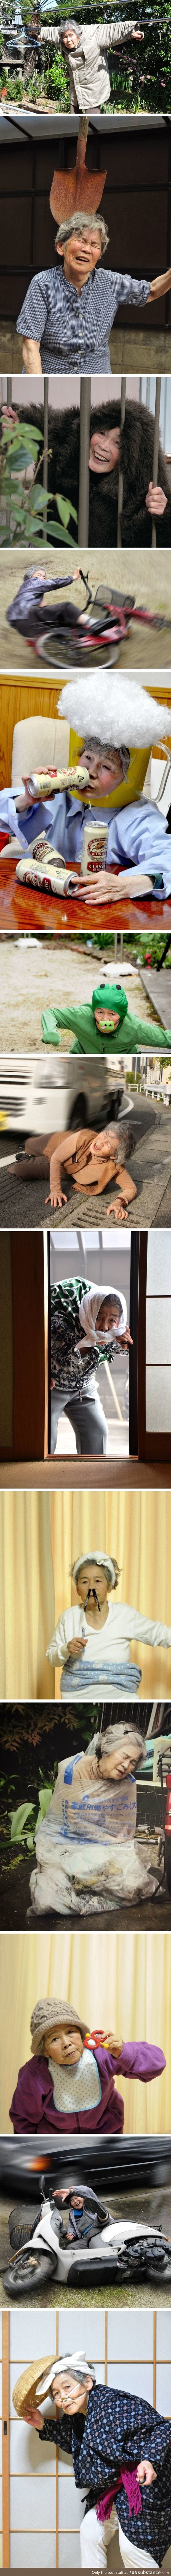 89-year-old japanese grandma discovers photography